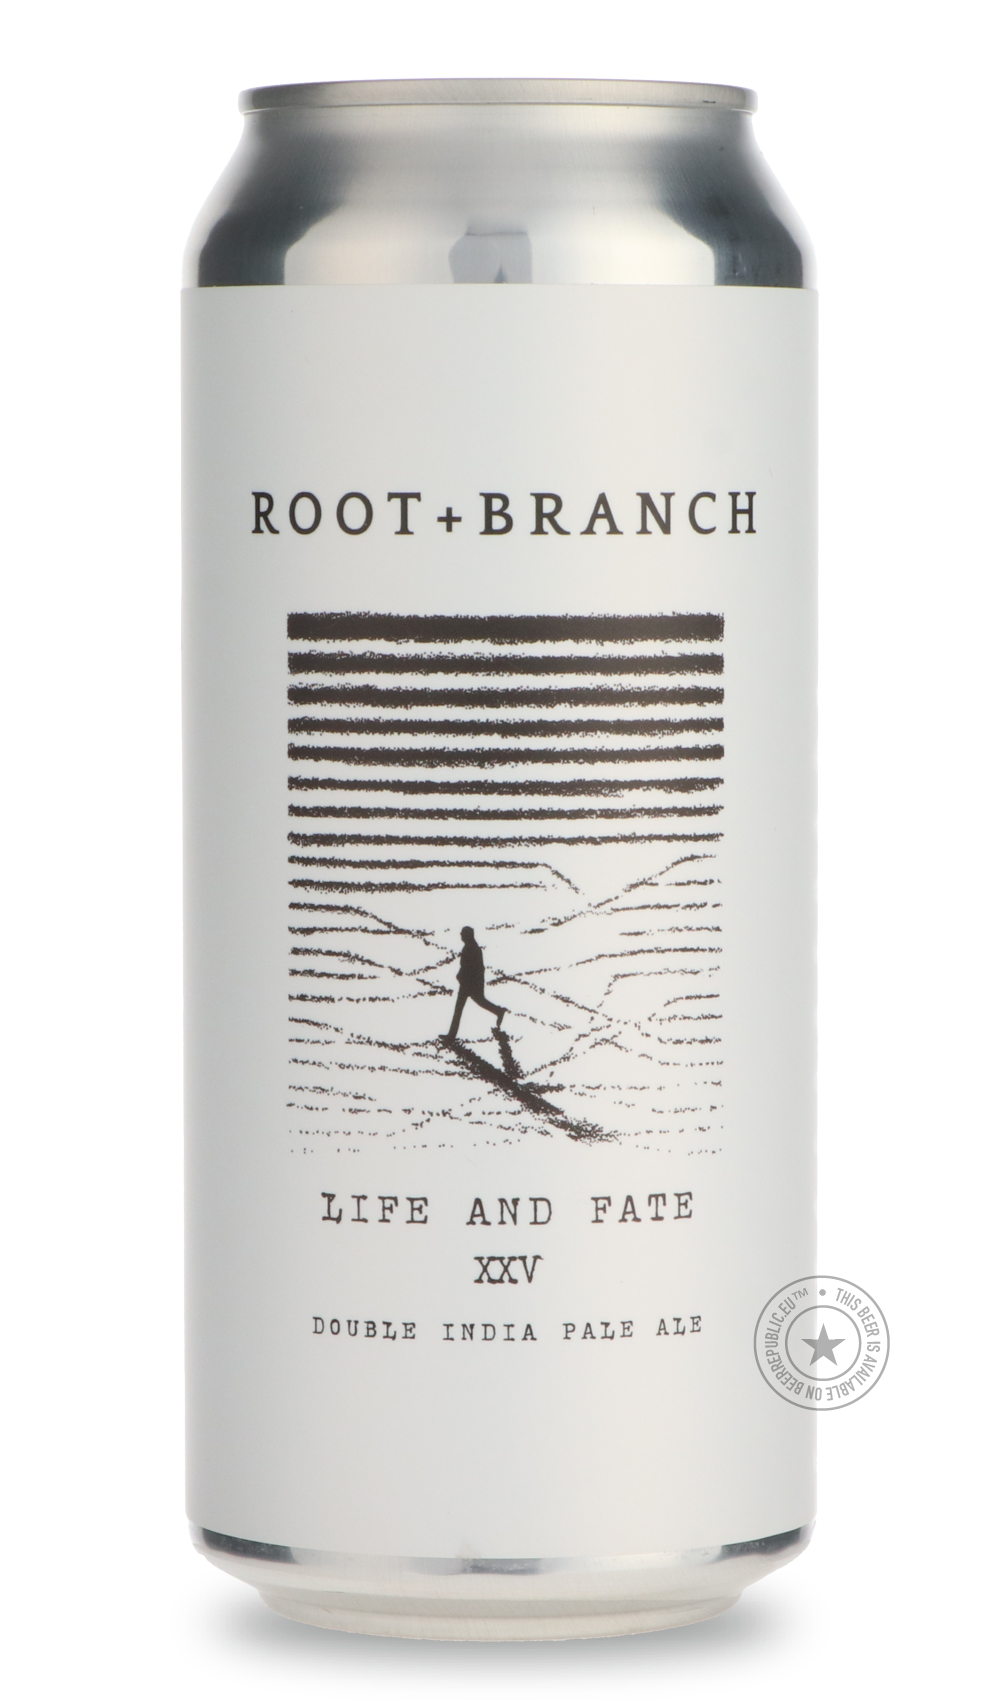 -Root + Branch- Life And Fate XXV-IPA- Only @ Beer Republic - The best online beer store for American & Canadian craft beer - Buy beer online from the USA and Canada - Bier online kopen - Amerikaans bier kopen - Craft beer store - Craft beer kopen - Amerikanisch bier kaufen - Bier online kaufen - Acheter biere online - IPA - Stout - Porter - New England IPA - Hazy IPA - Imperial Stout - Barrel Aged - Barrel Aged Imperial Stout - Brown - Dark beer - Blond - Blonde - Pilsner - Lager - Wheat - Weizen - Amber -